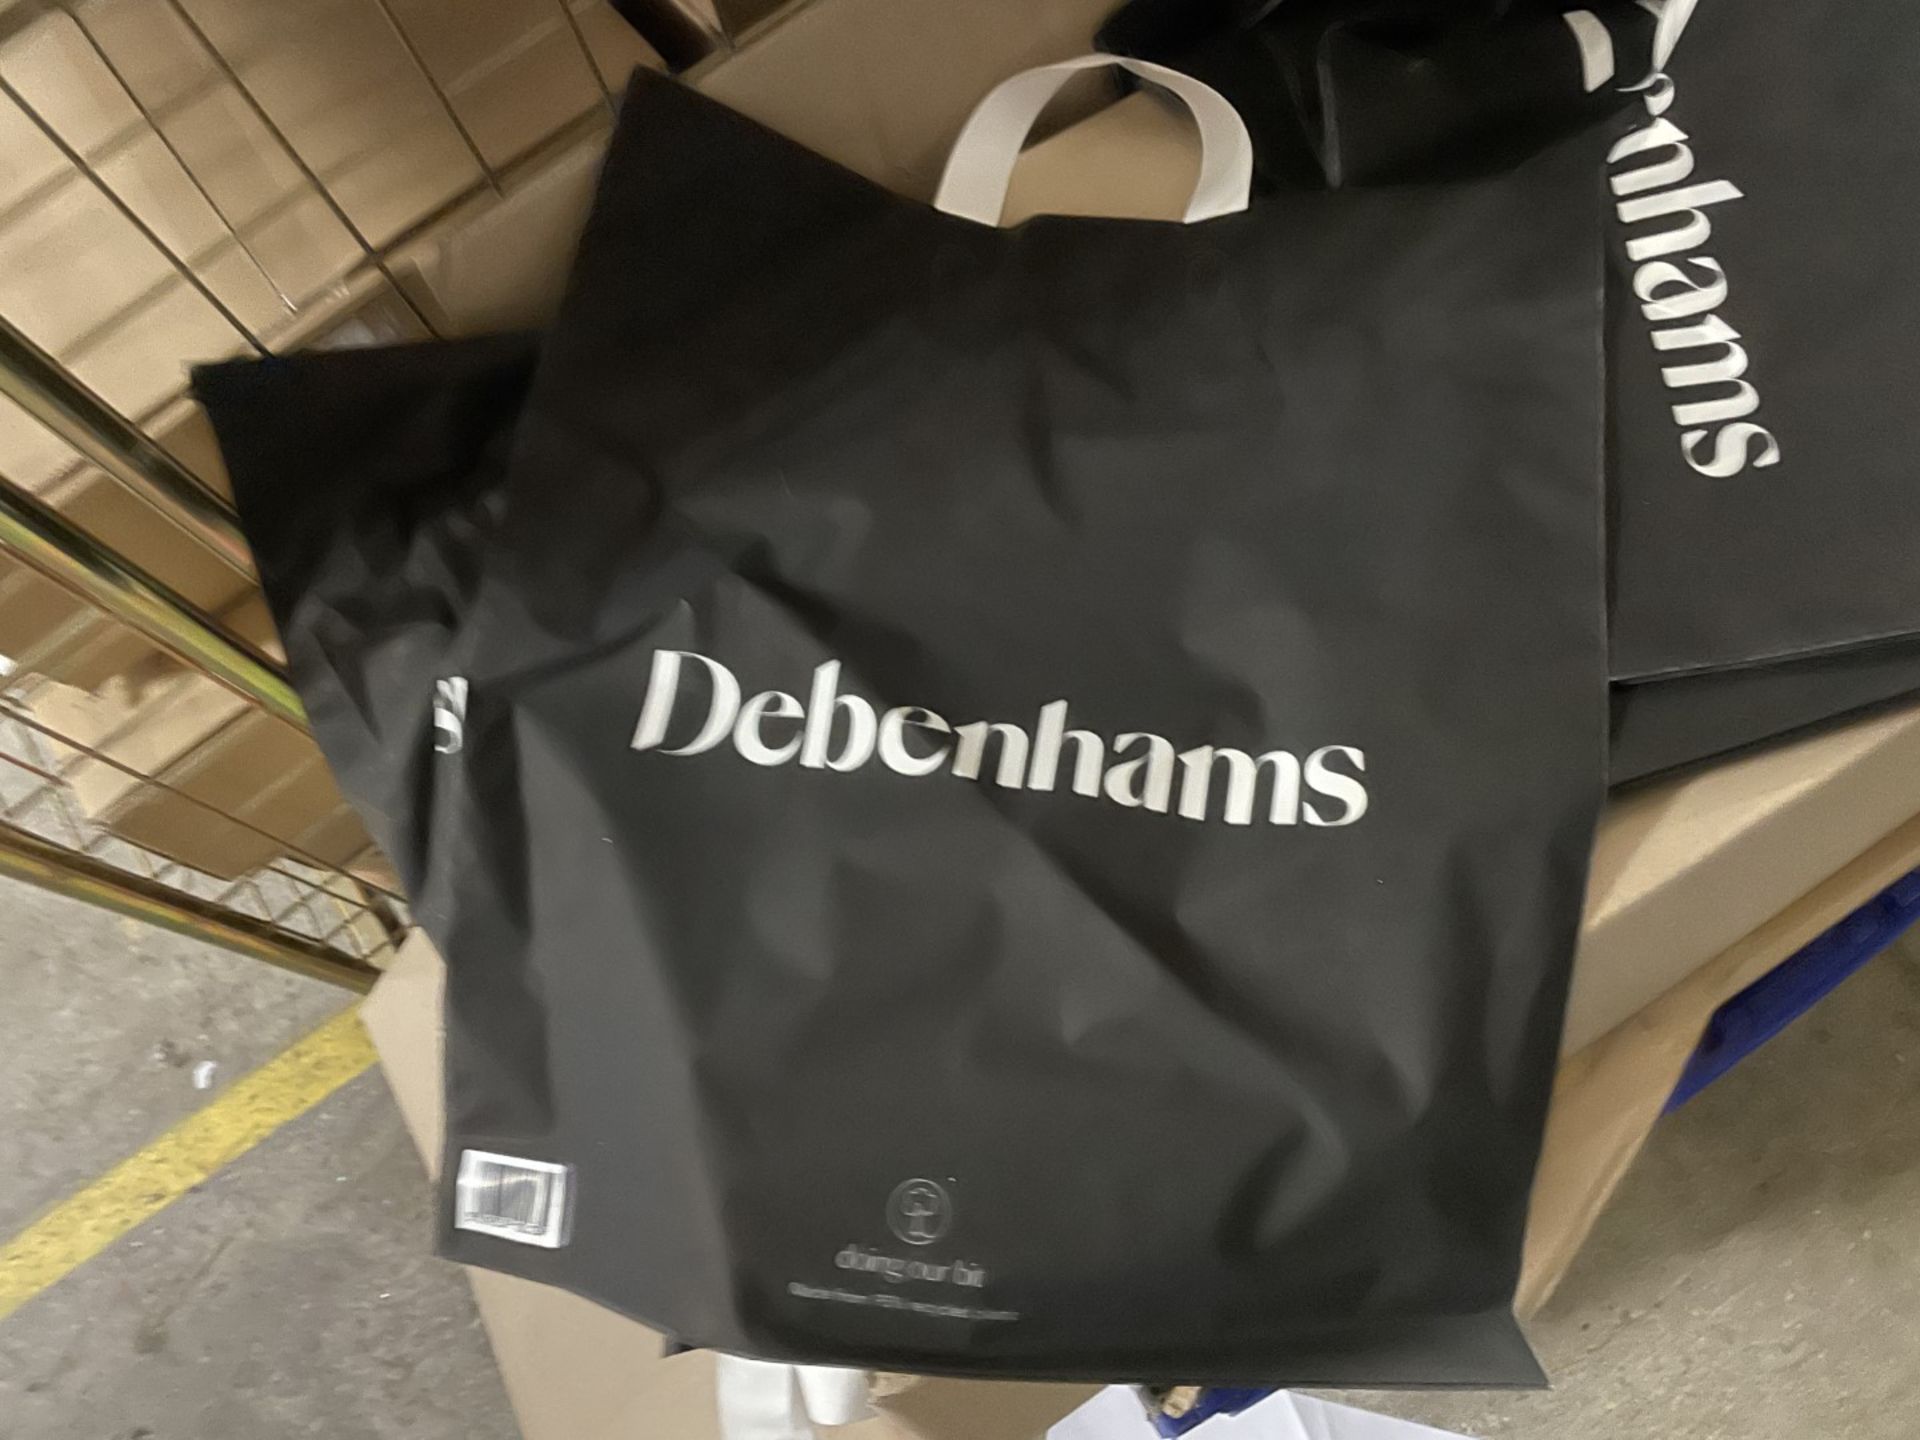 47 x Boxes of Debenhams High Quality Shopping Bags - Brand New Boxes - CL670 - Ref: GEM279B -